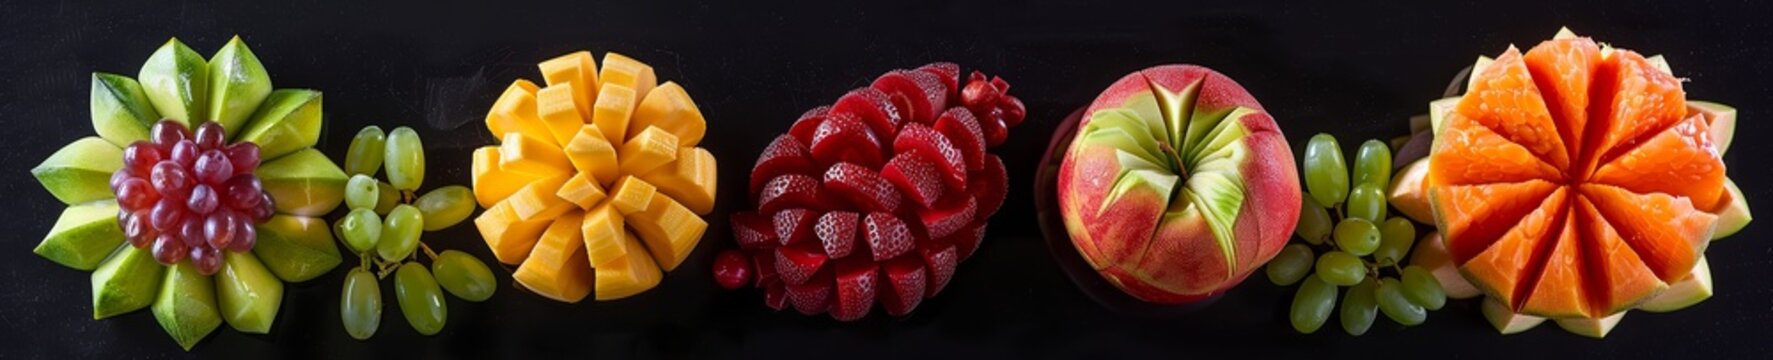 Artistic fruit carving showcasing skill and the beauty of raw ingredients